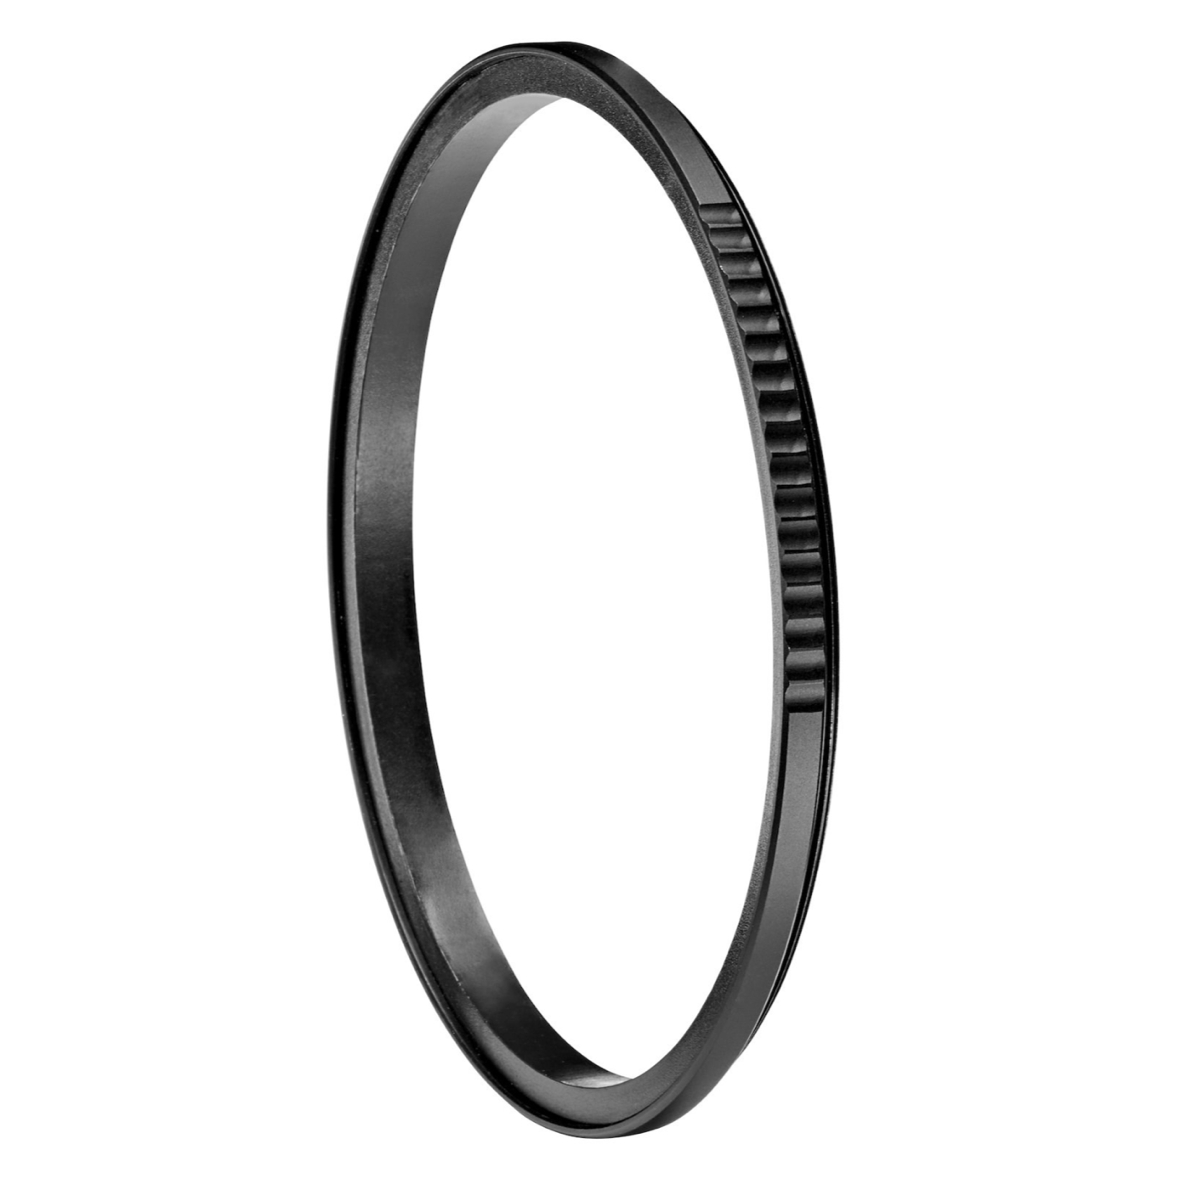 Manfrotto XUME 67mm Lens Adapter